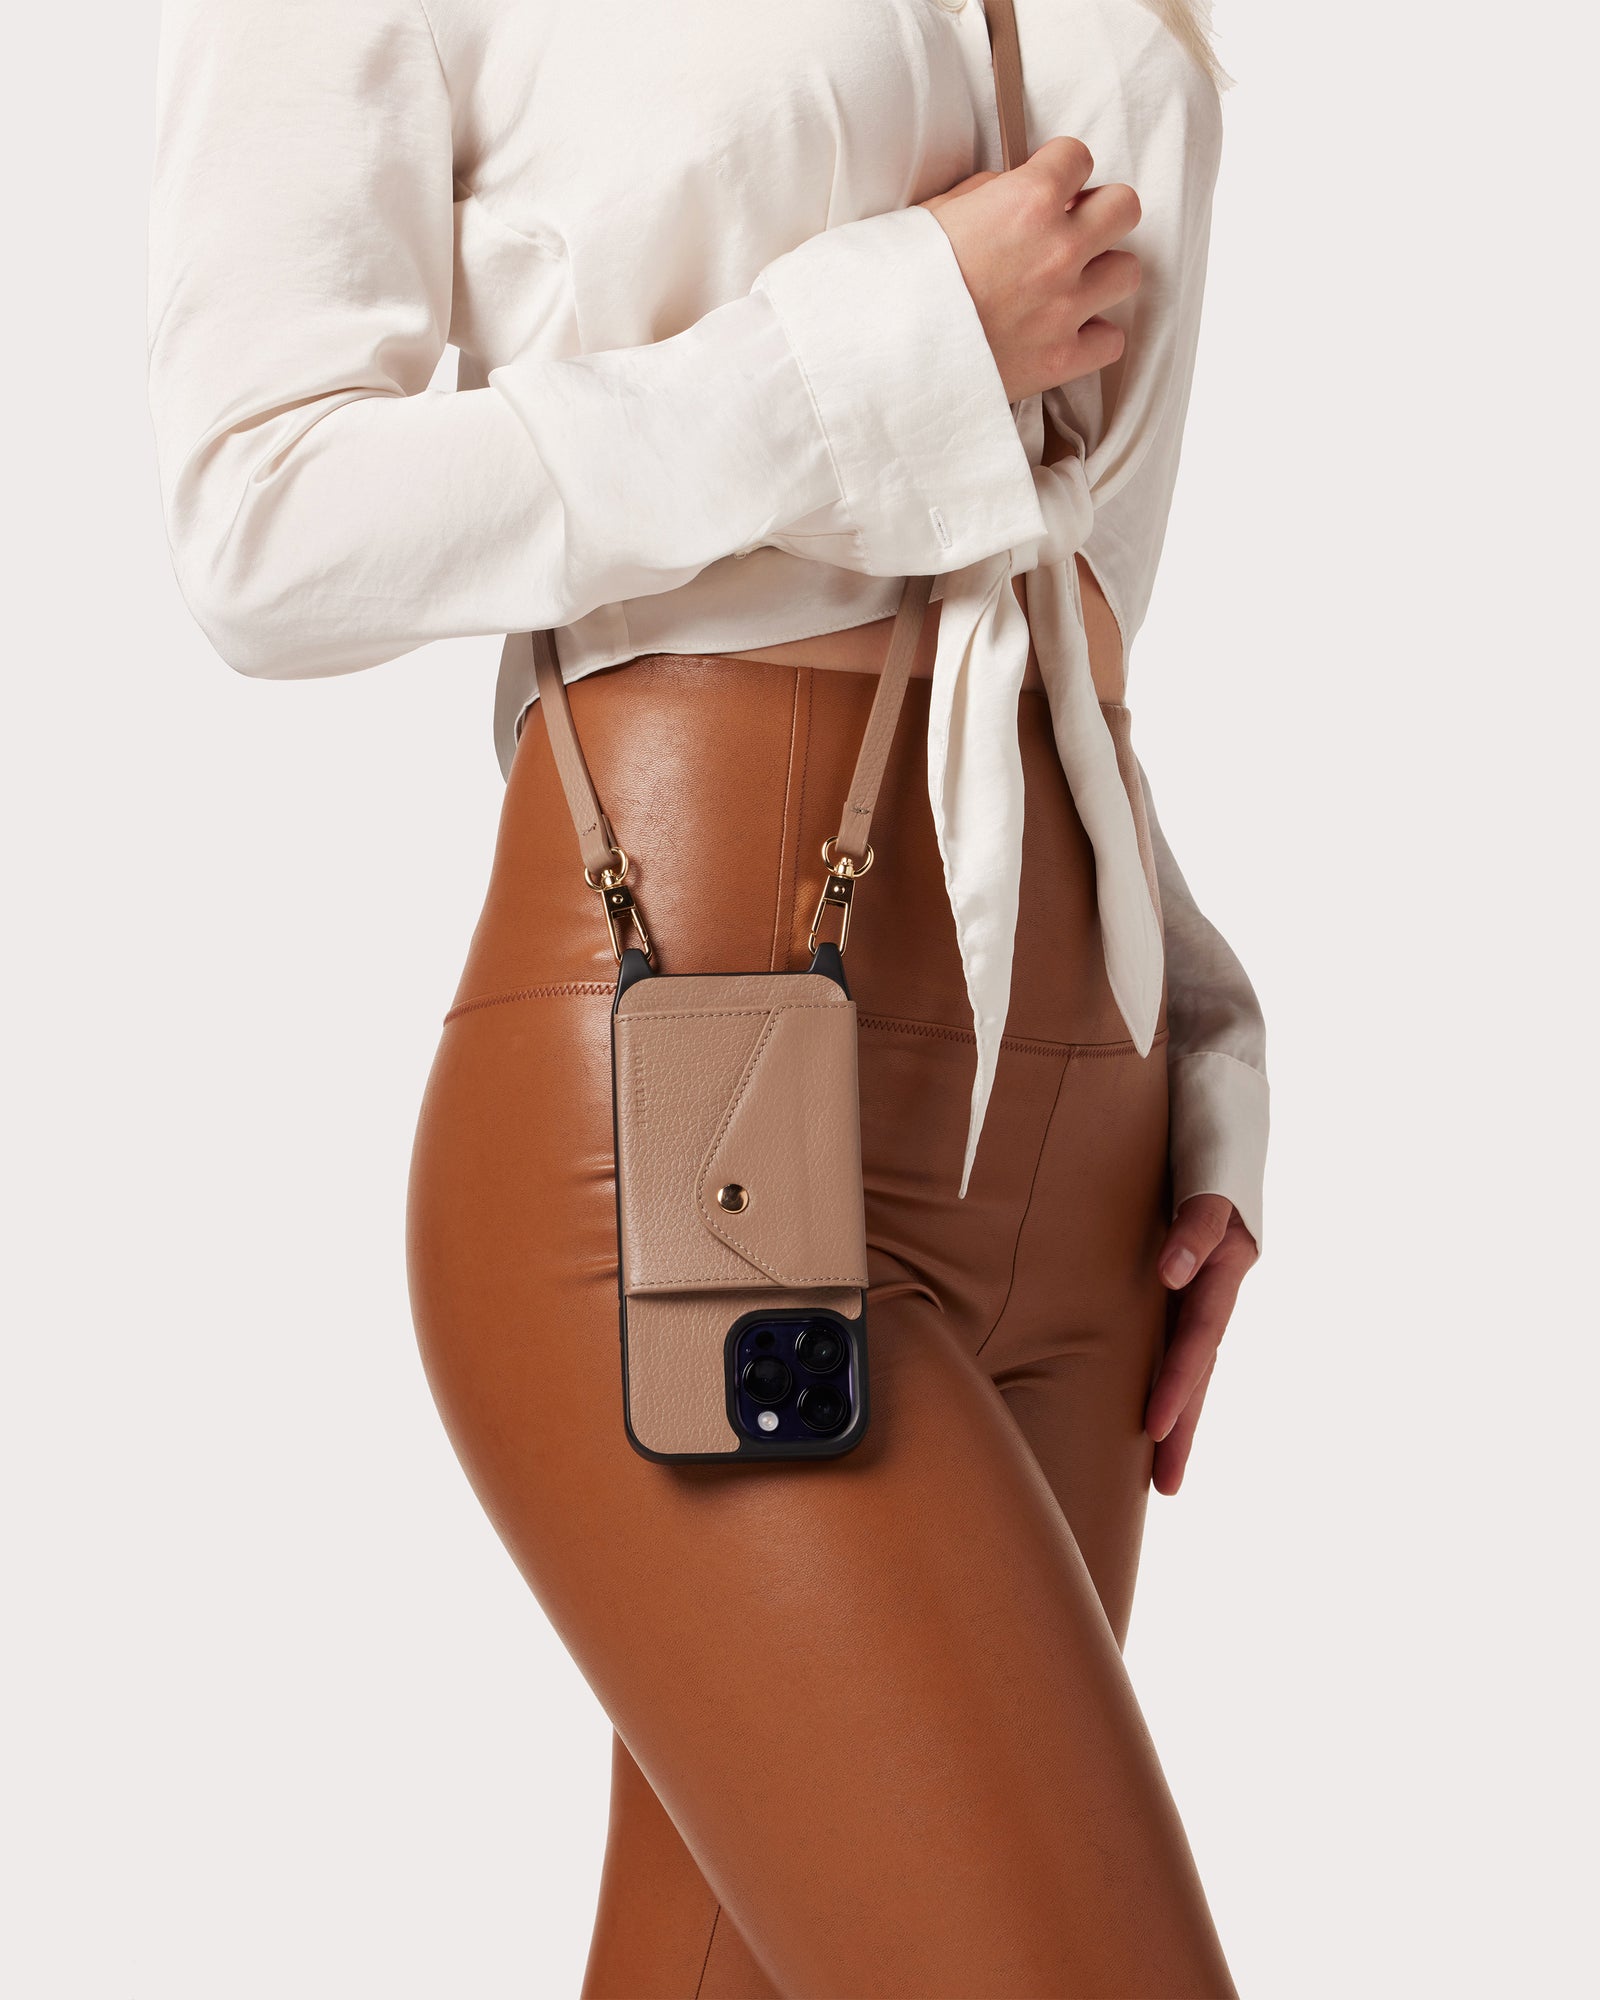 HOLSTERE - Genuine Leather iPhone Case Crossbody - Free Your Hands